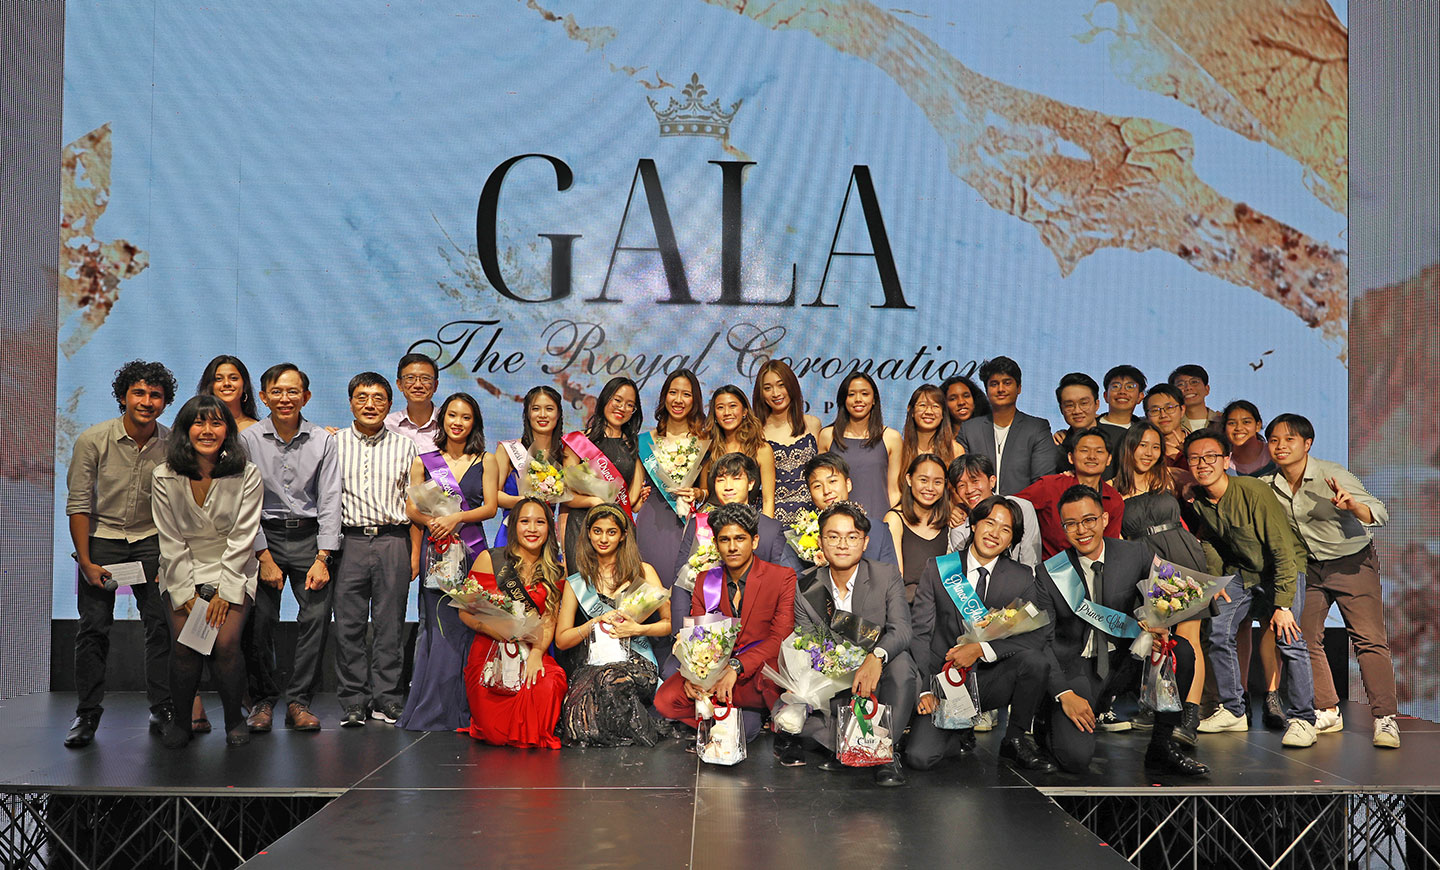 A group photo of students pageant contests and staff.